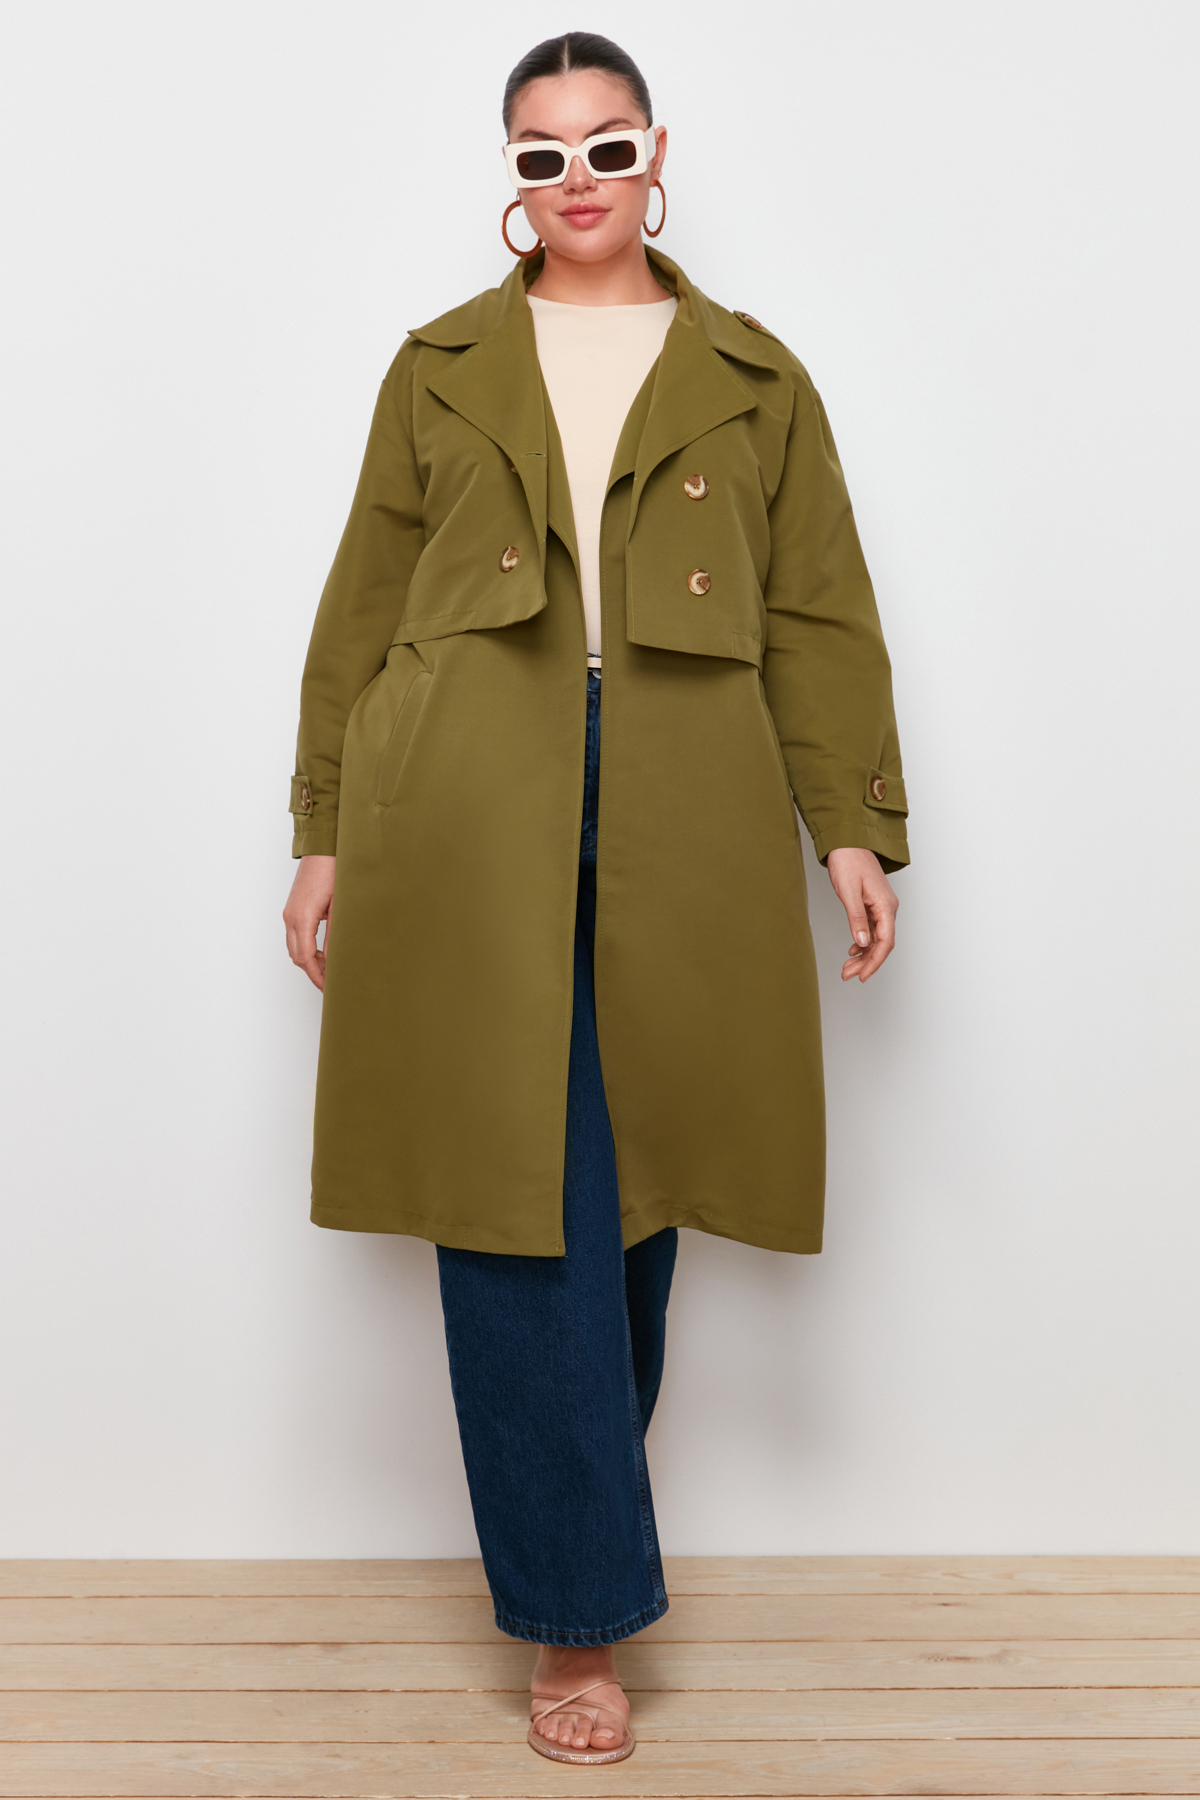 Trendyol Curve Khaki Long and Short Unlined Trench Coat that can be combined in 3 different ways